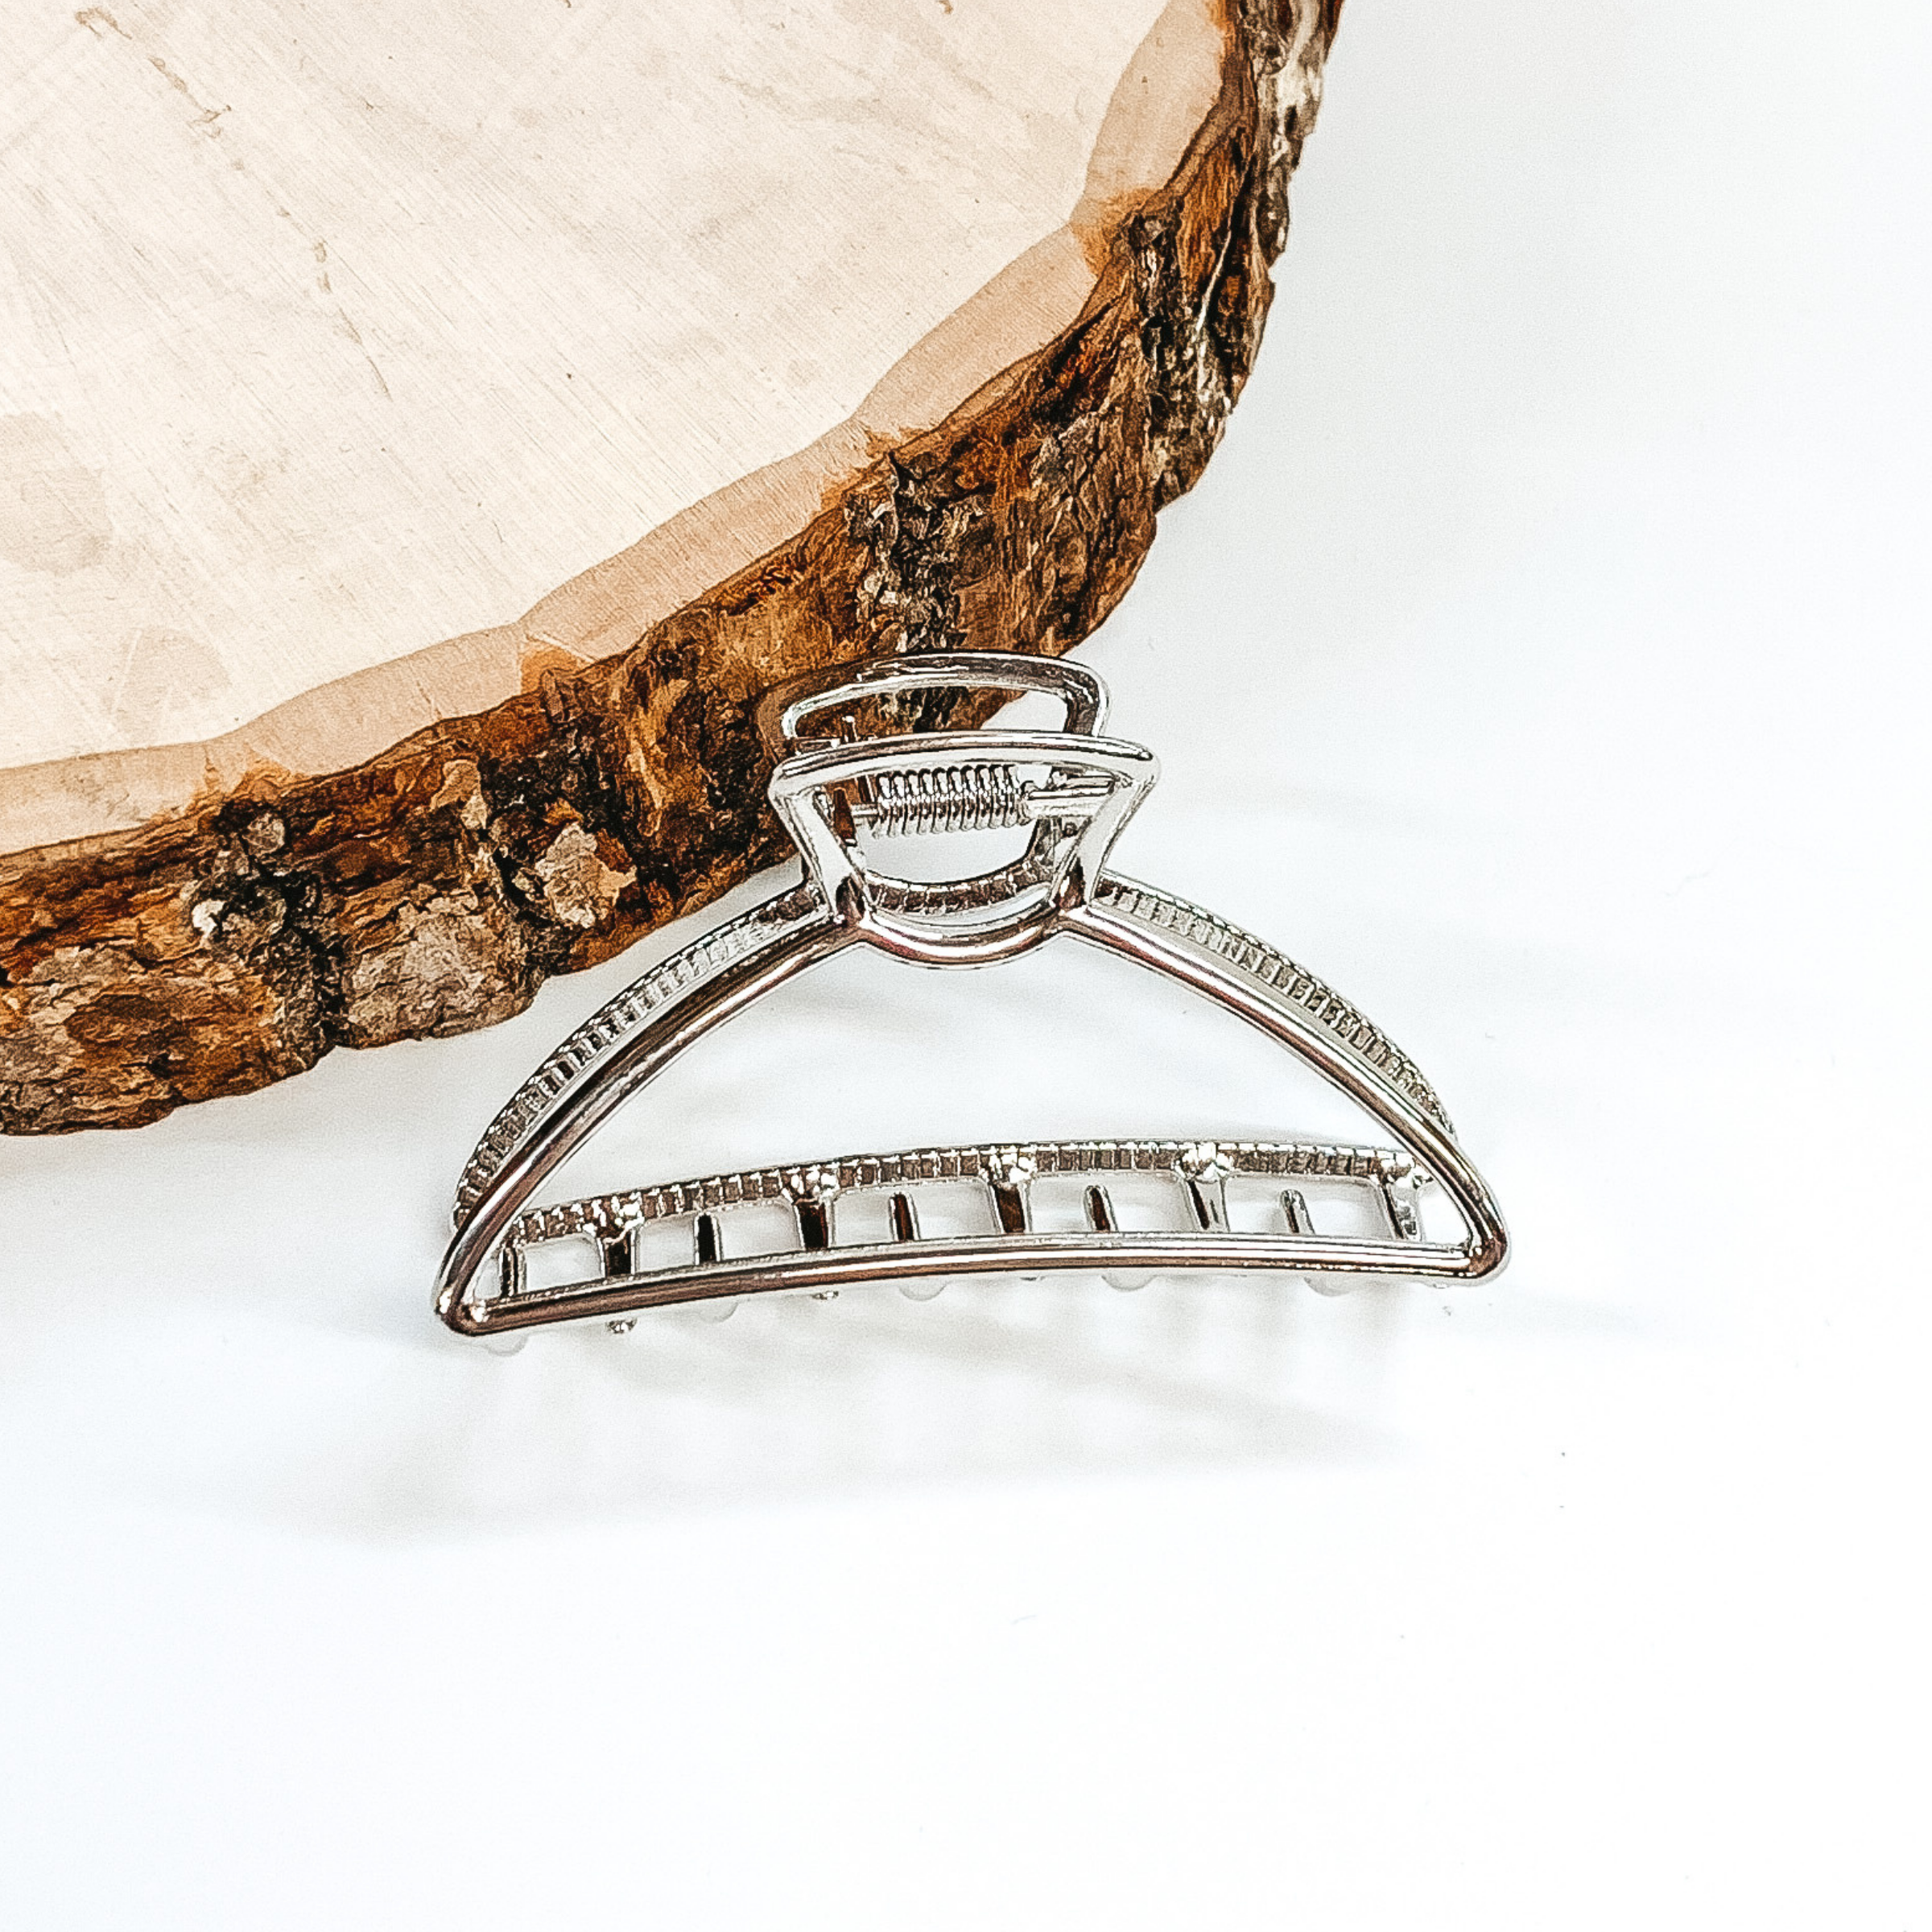 Shiny silver, rounded, open triangle clip. This clip is pictured in front of a piece of wood on a white background. 